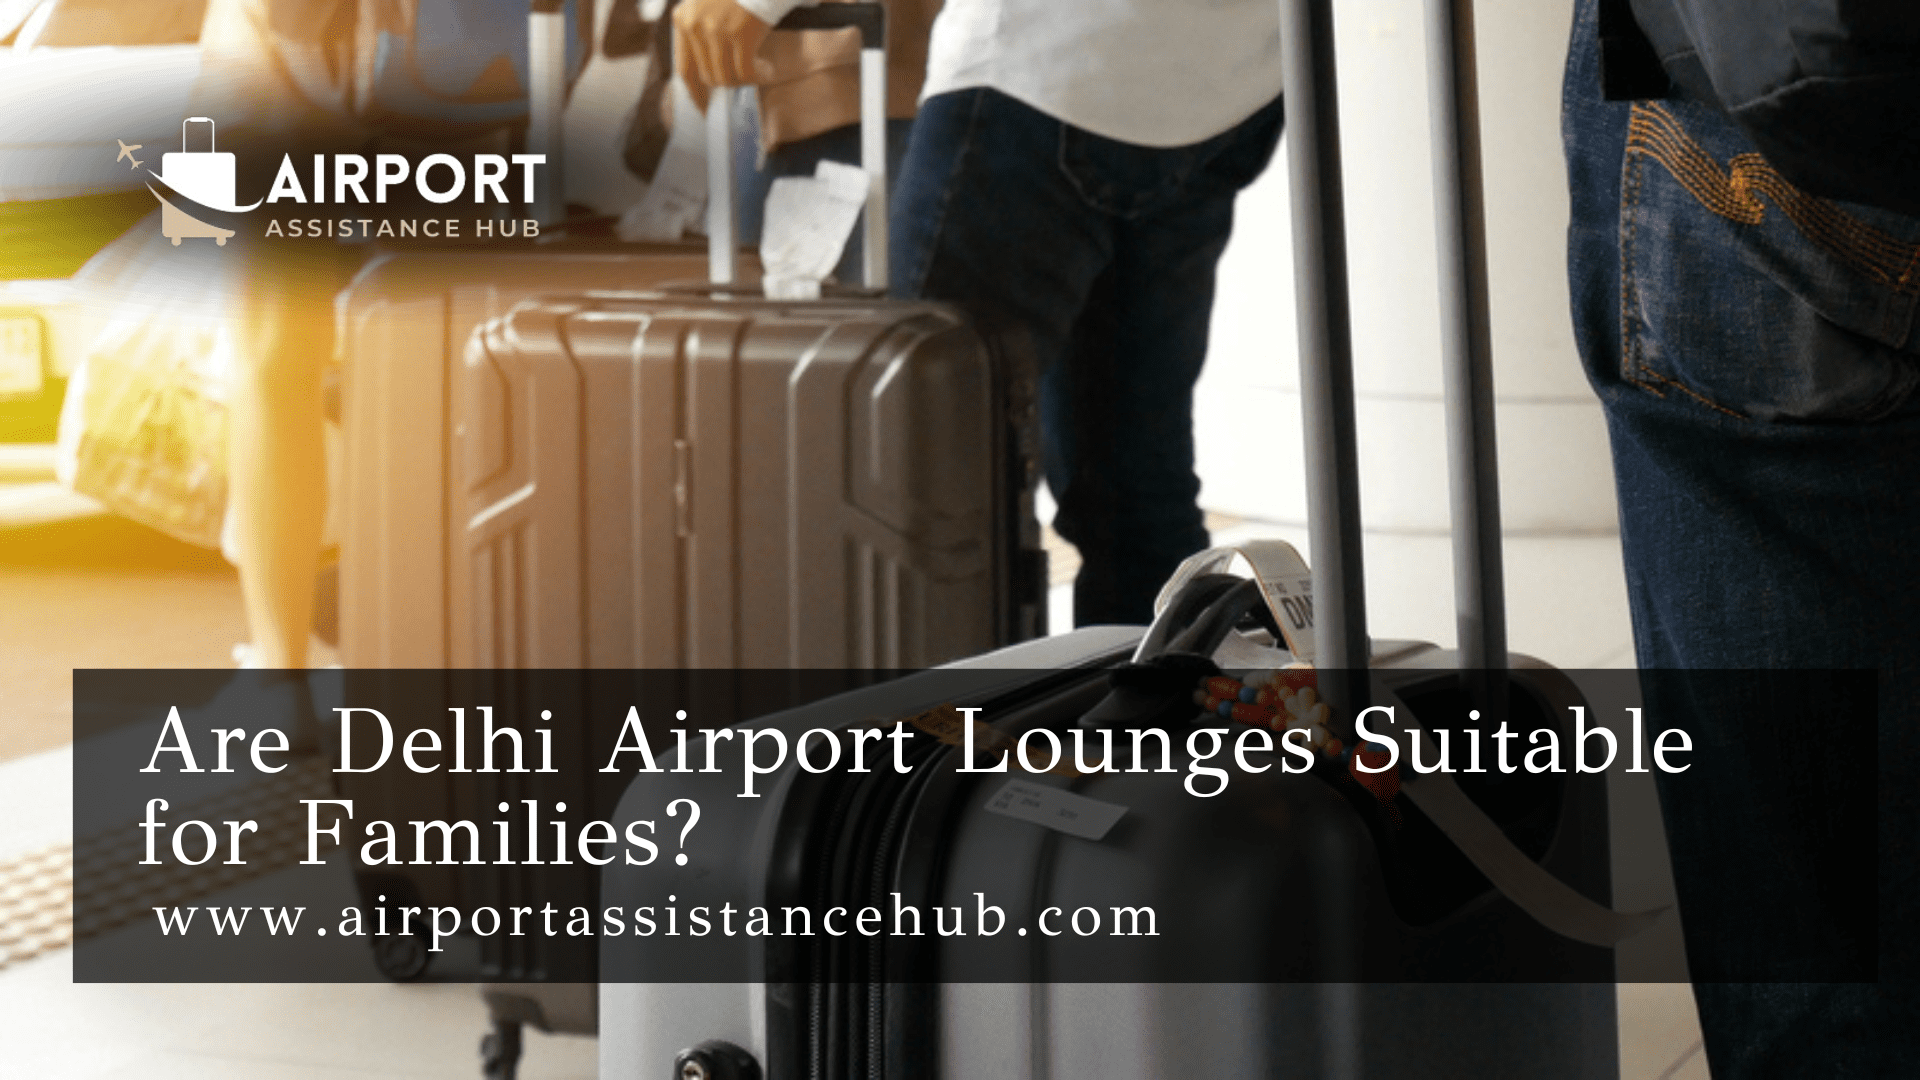 Are Delhi Airport Lounges Suitable for Families?